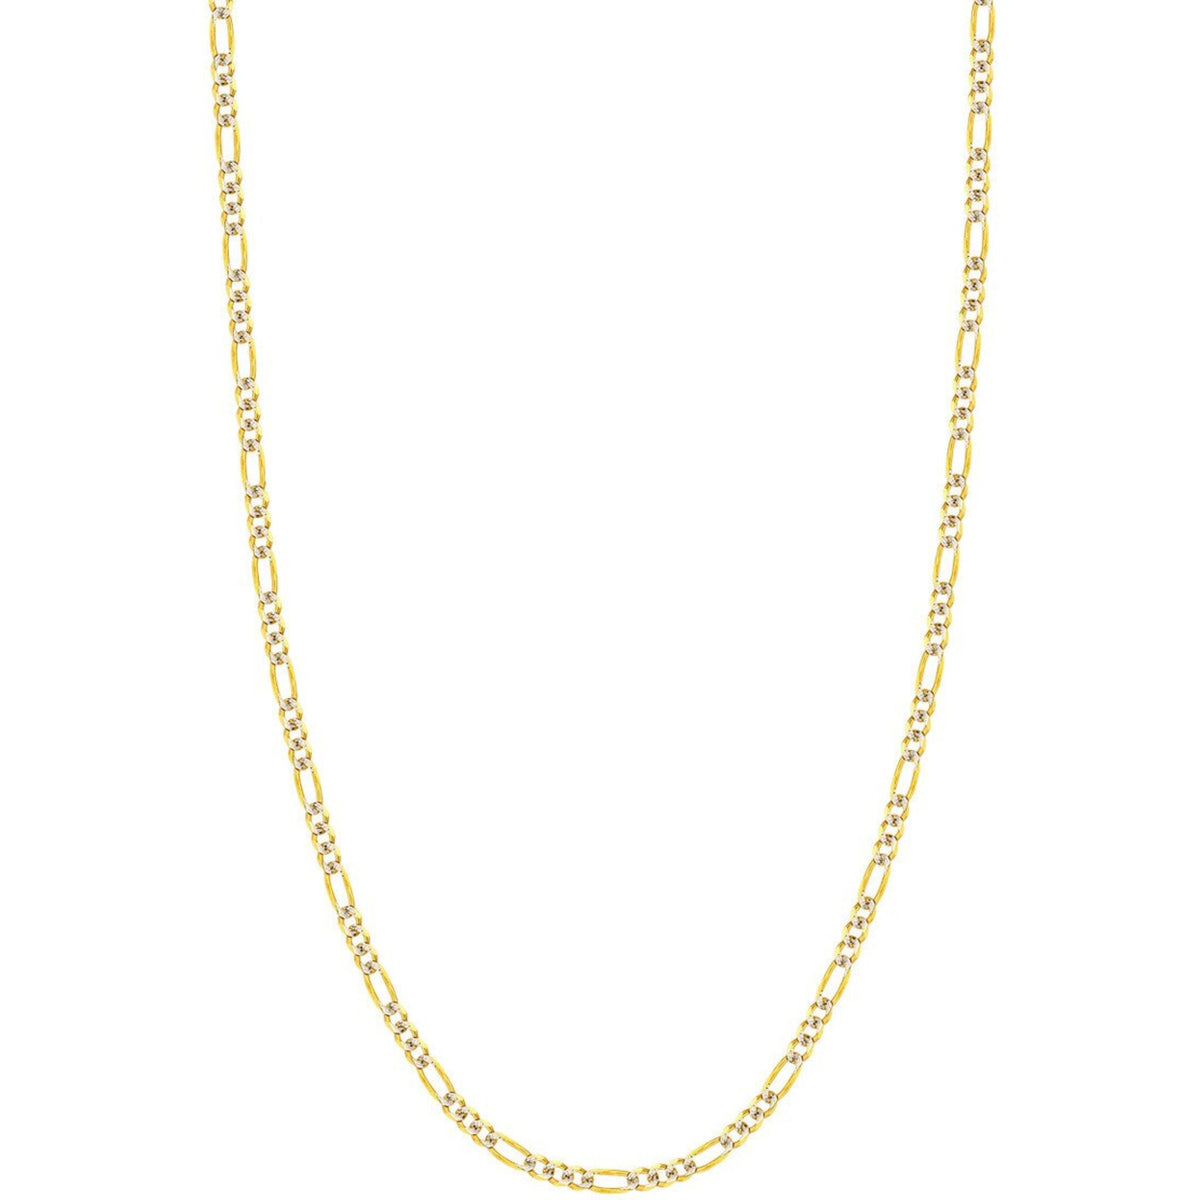 Olas d'Oro 24" Necklace - 14K Yellow/White Gold 3.2mm Two-Tone Pave Figaro Chain with Lobster Lock